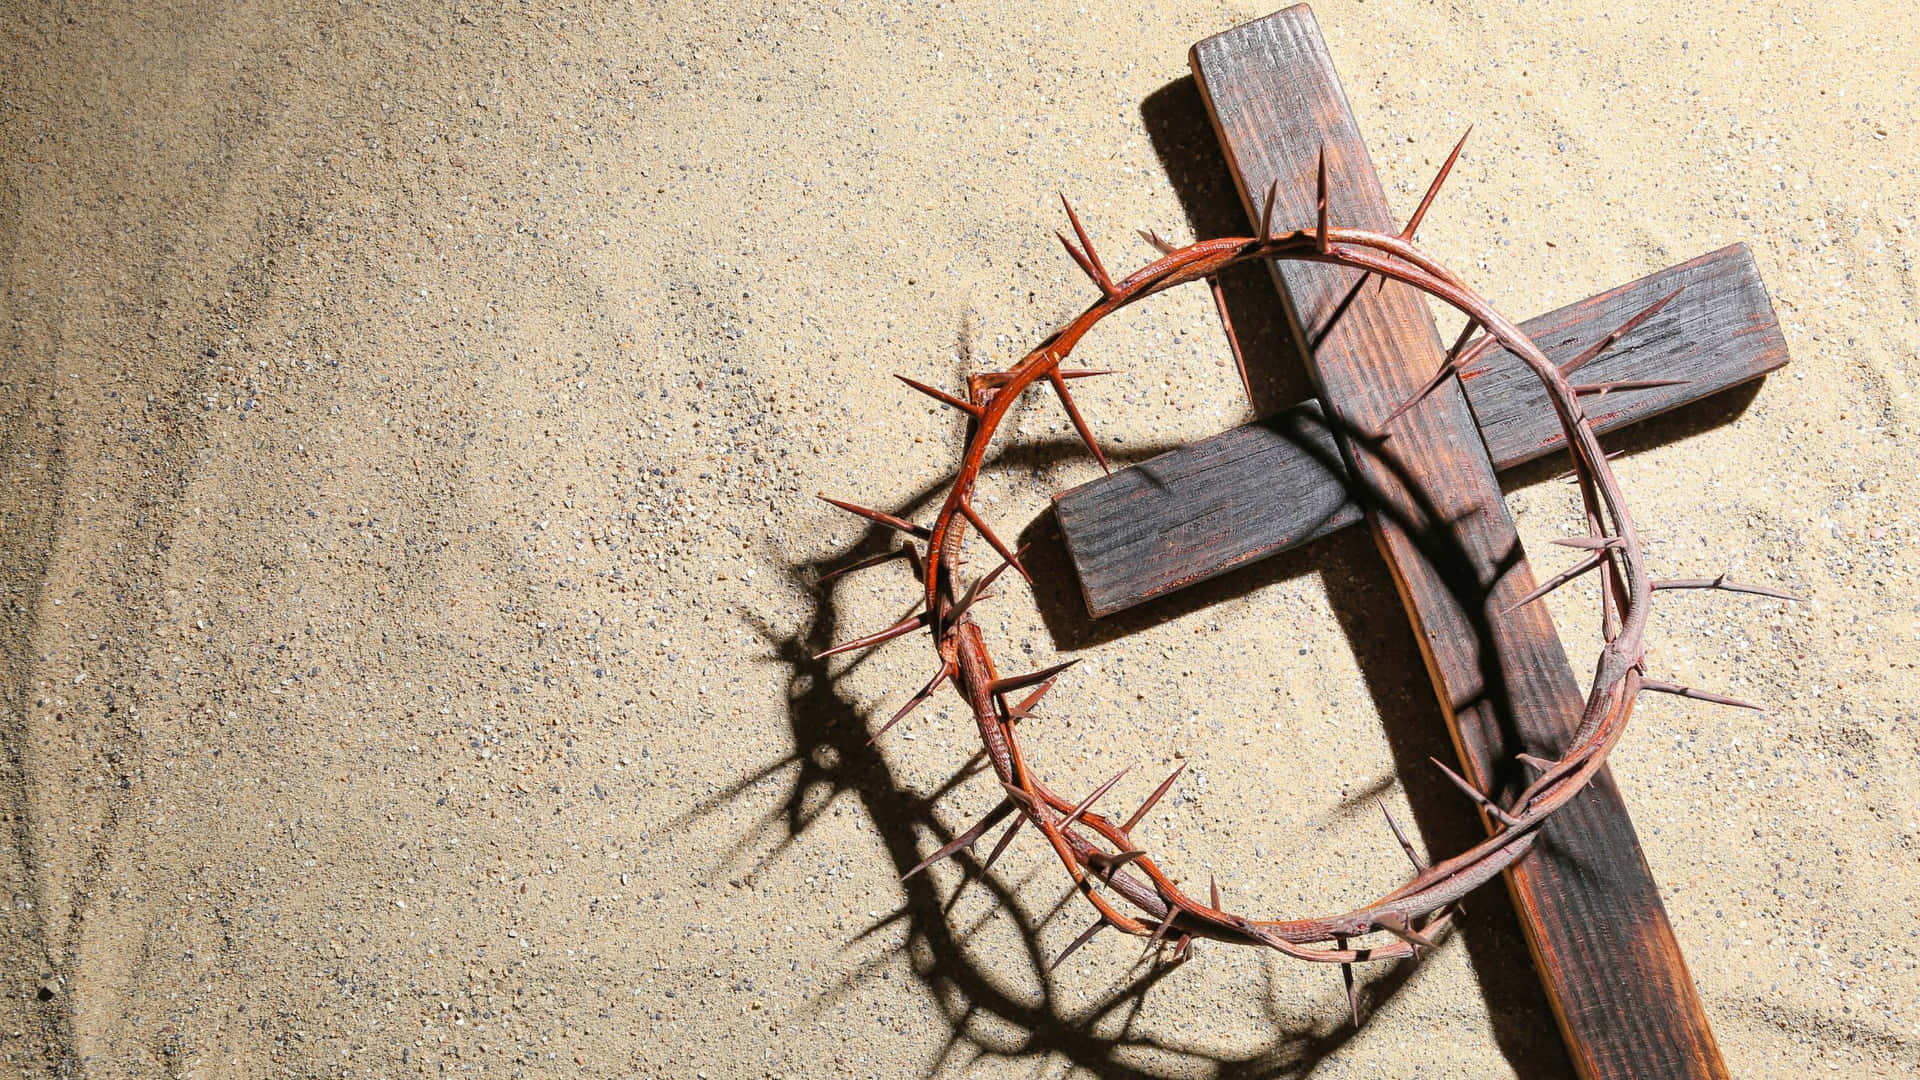 "Bringing the beauty of spring together with the remembrance of Christ's death this Good Friday"